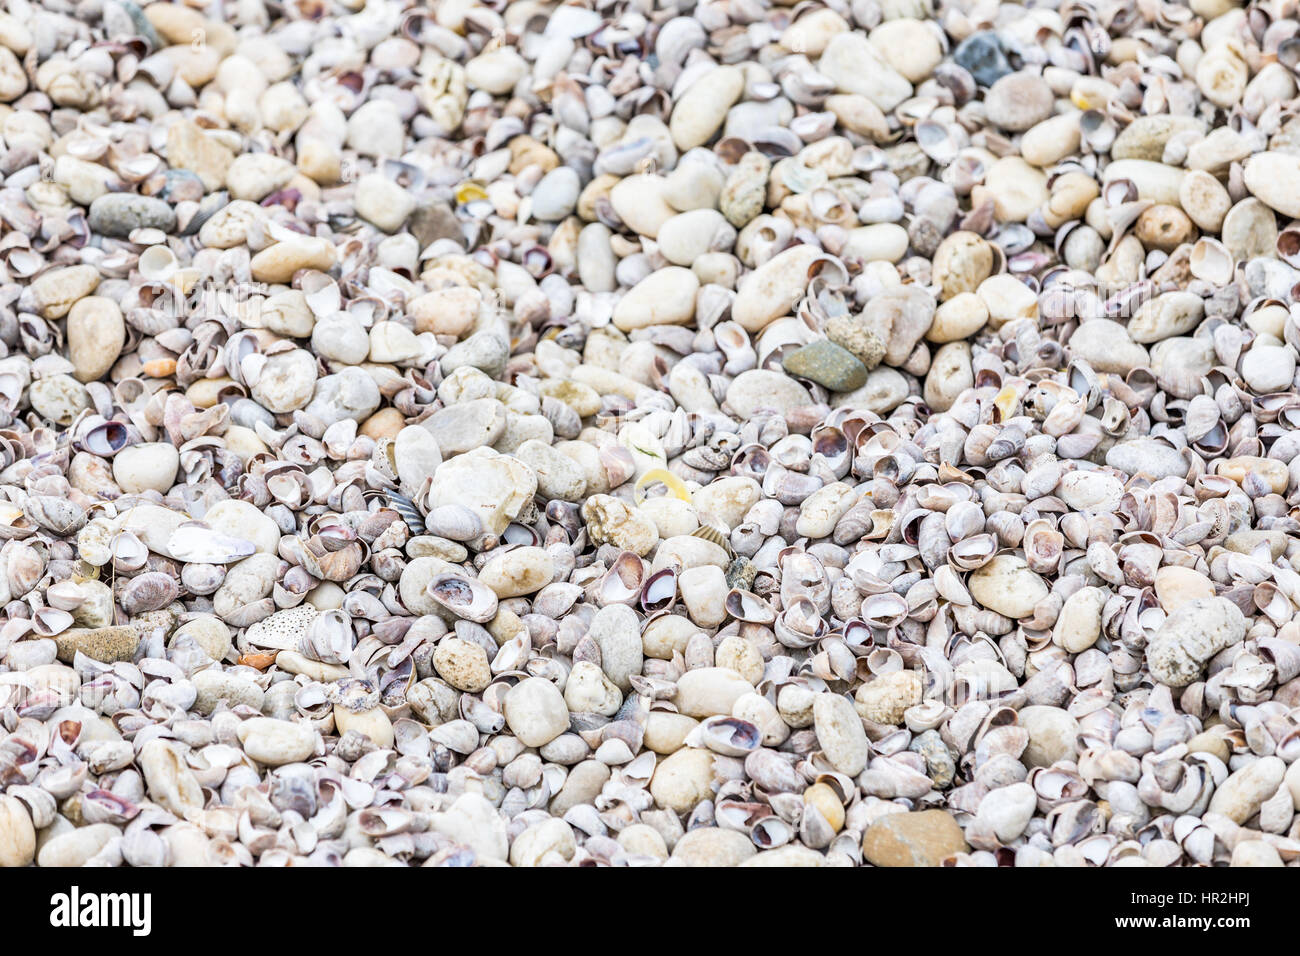 detail of small shells found at a ocean beach in Eastern Long Island Stock Photo